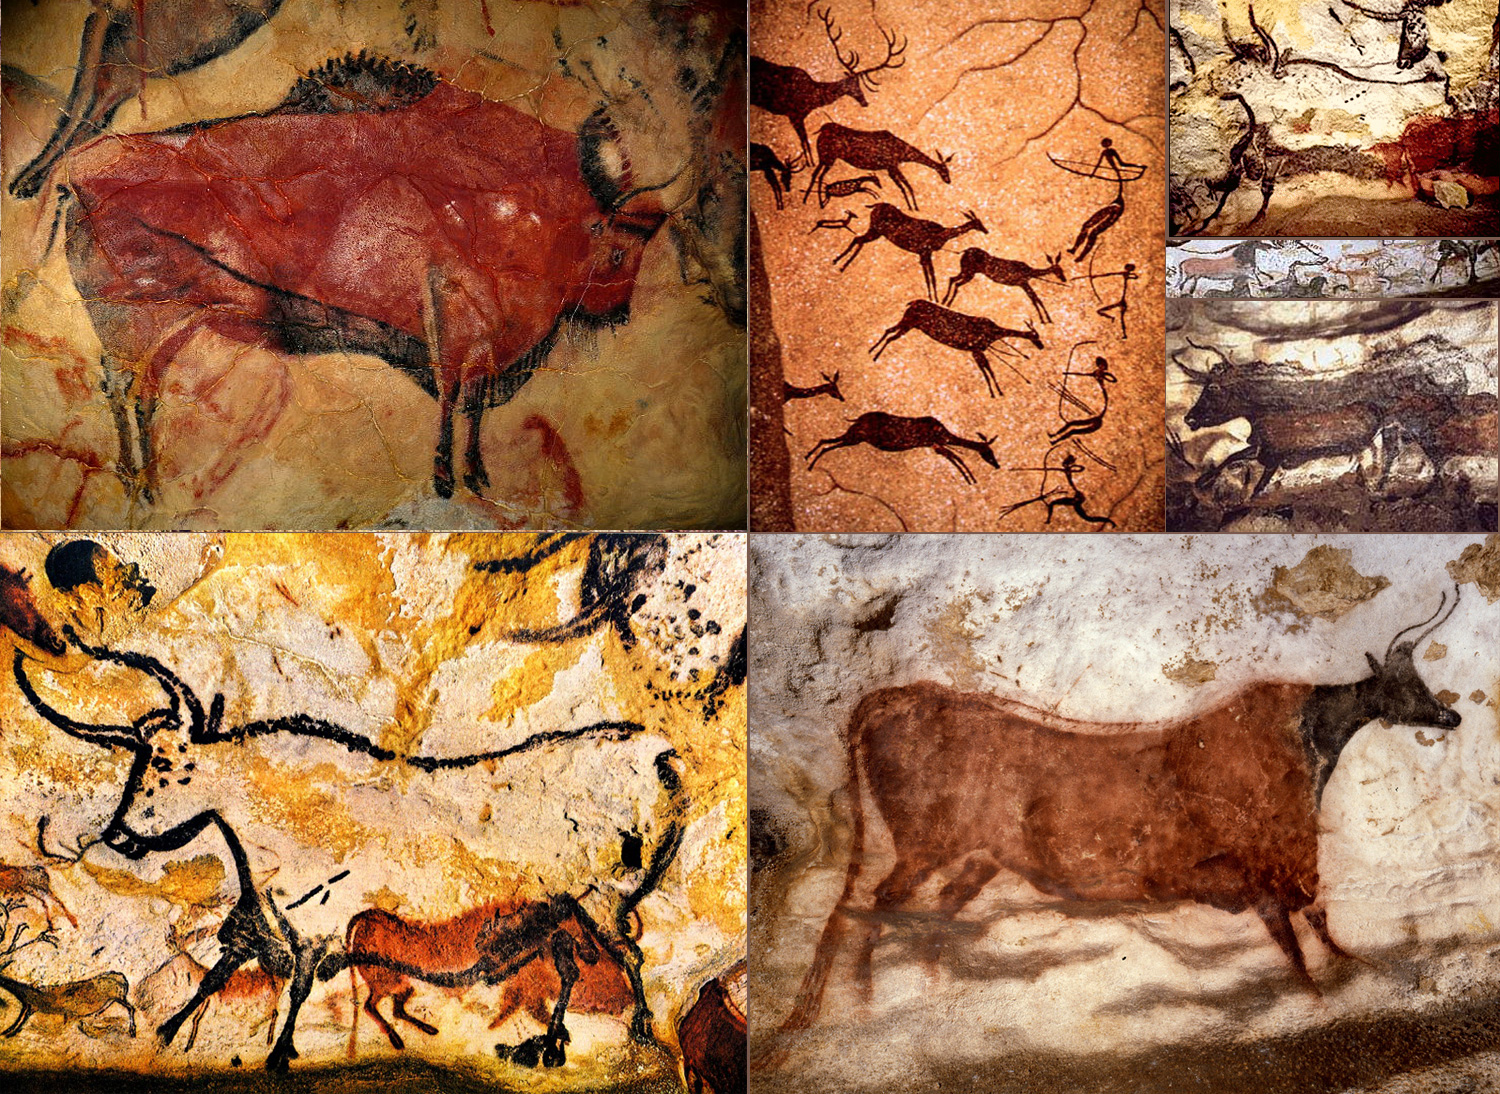 Cave paintings are discovered in Lascaux, France.